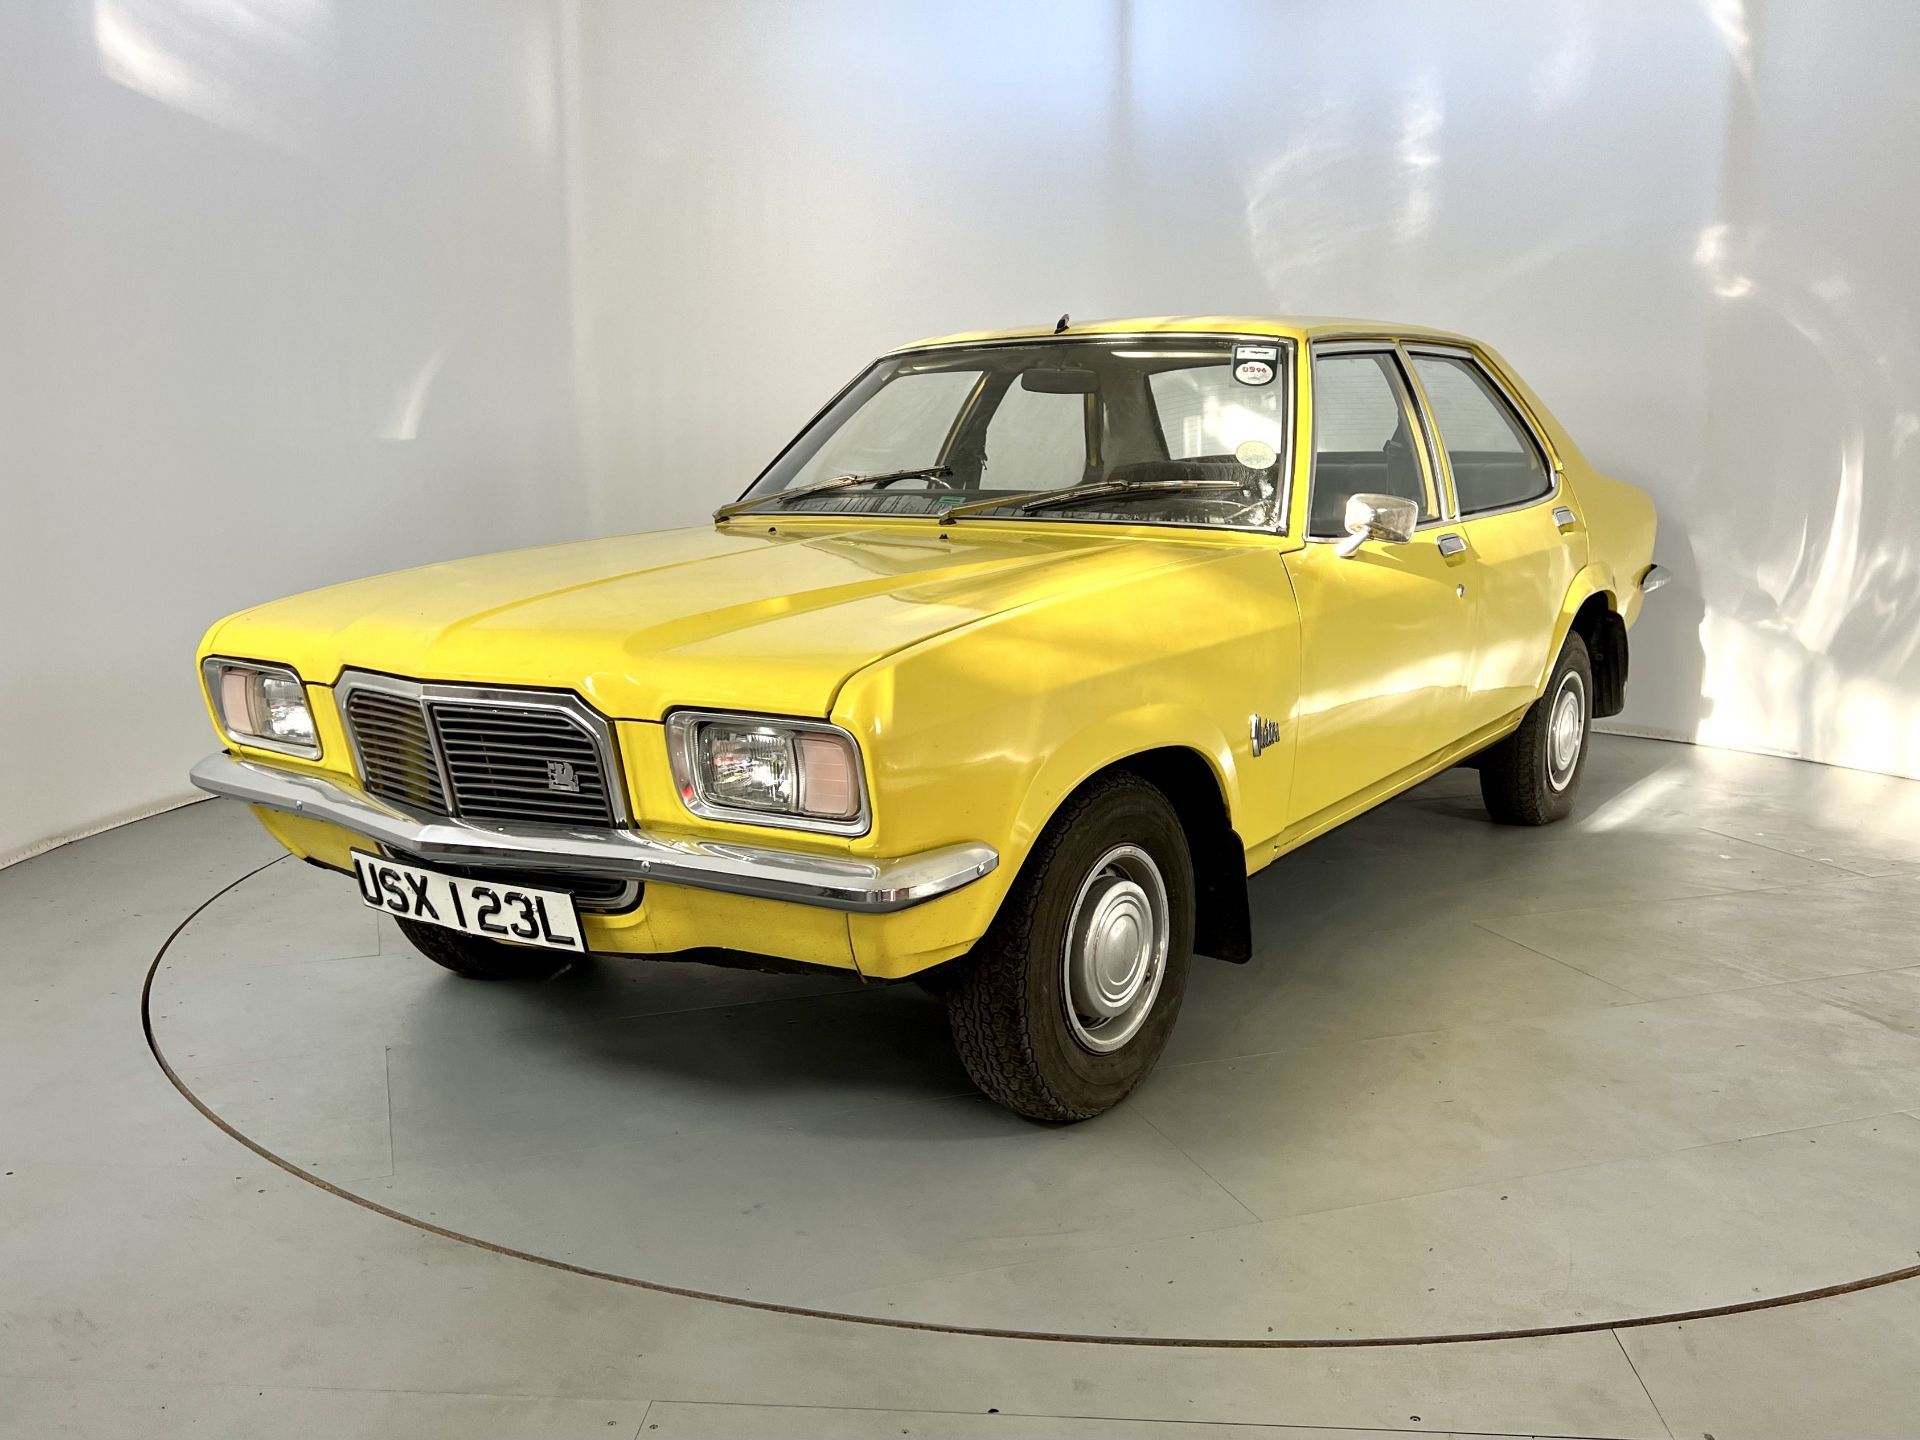 Vauxhall Victor - Image 3 of 33